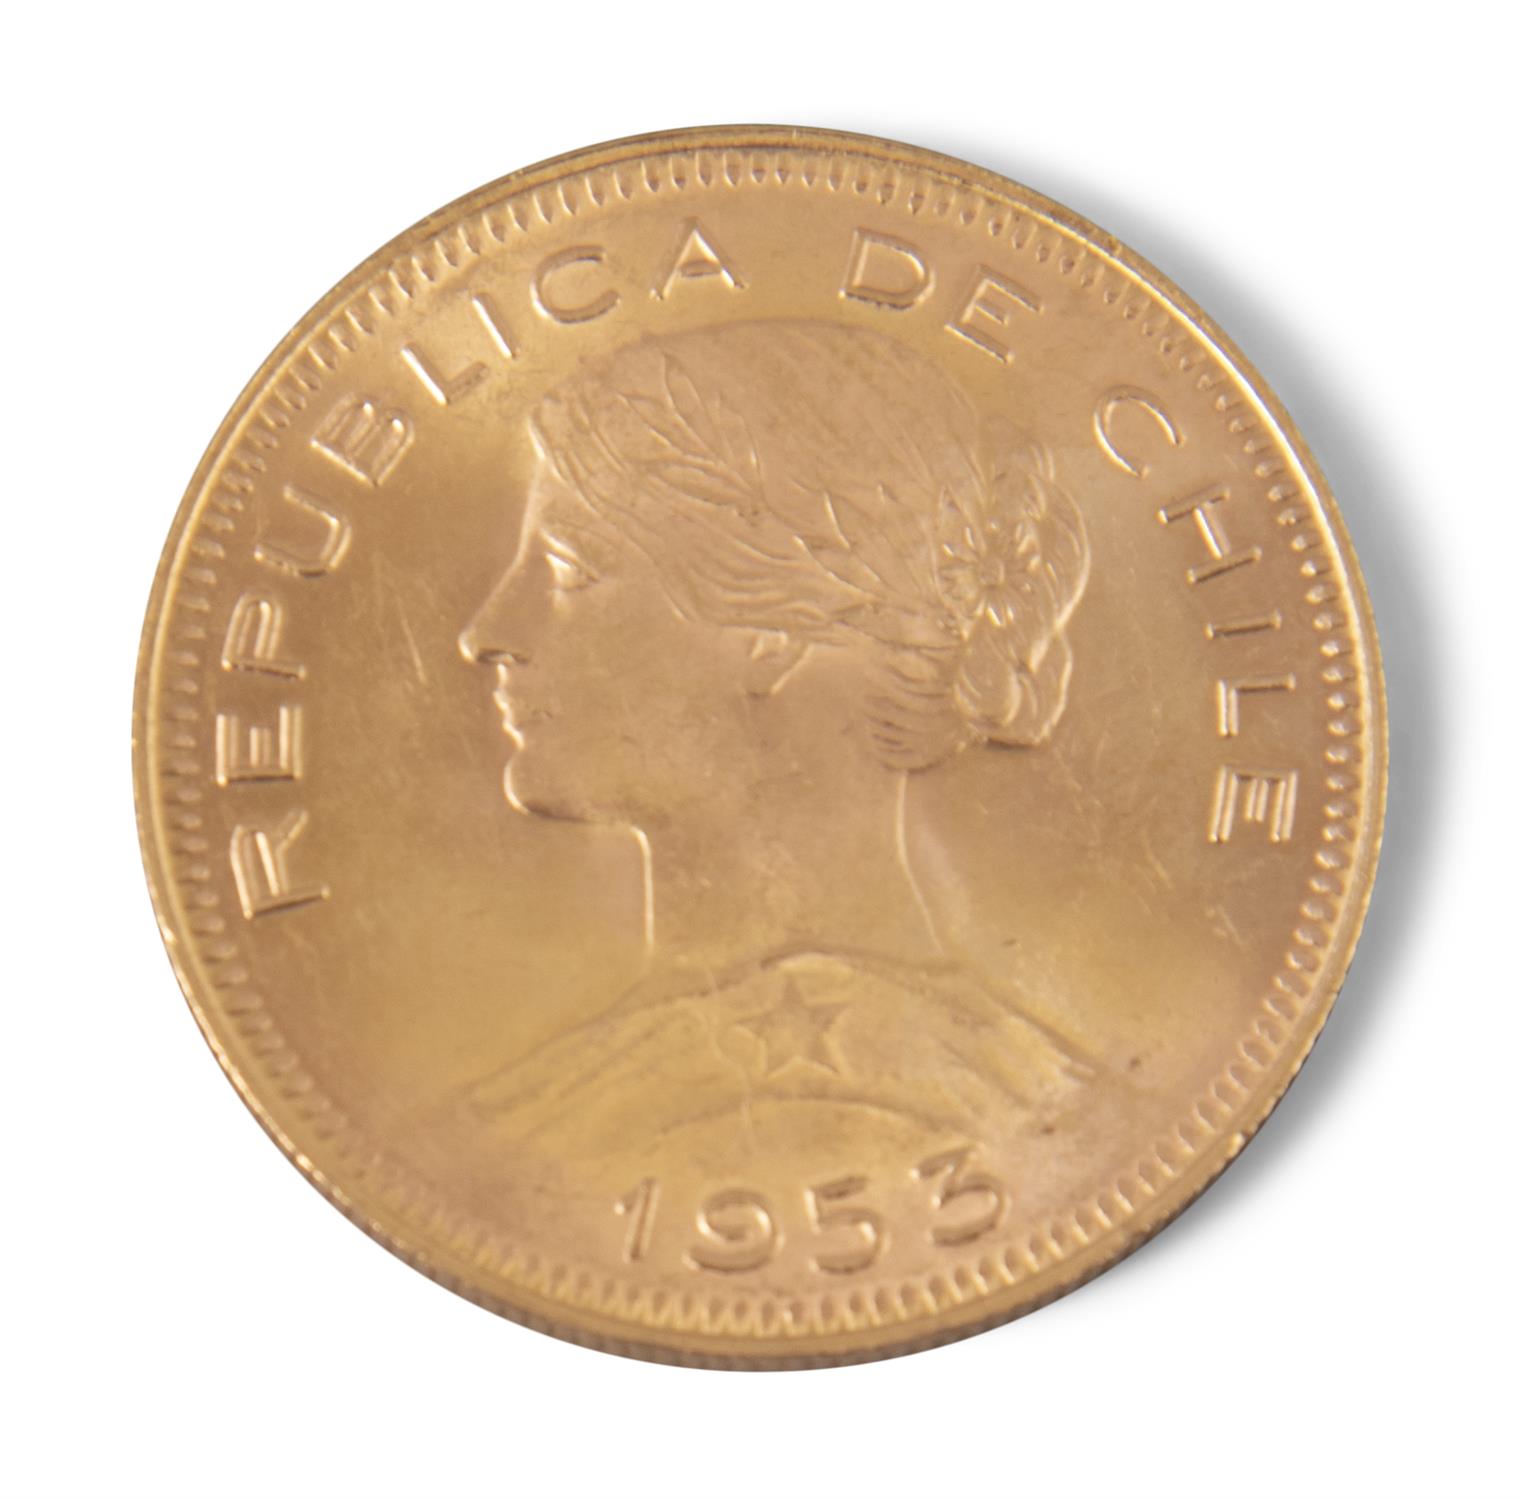 A CHILEAN 100 PESO GOLD COIN, 20.5g dating to 1953 *** PLEASE NOTE DESCRIPTION IN THE